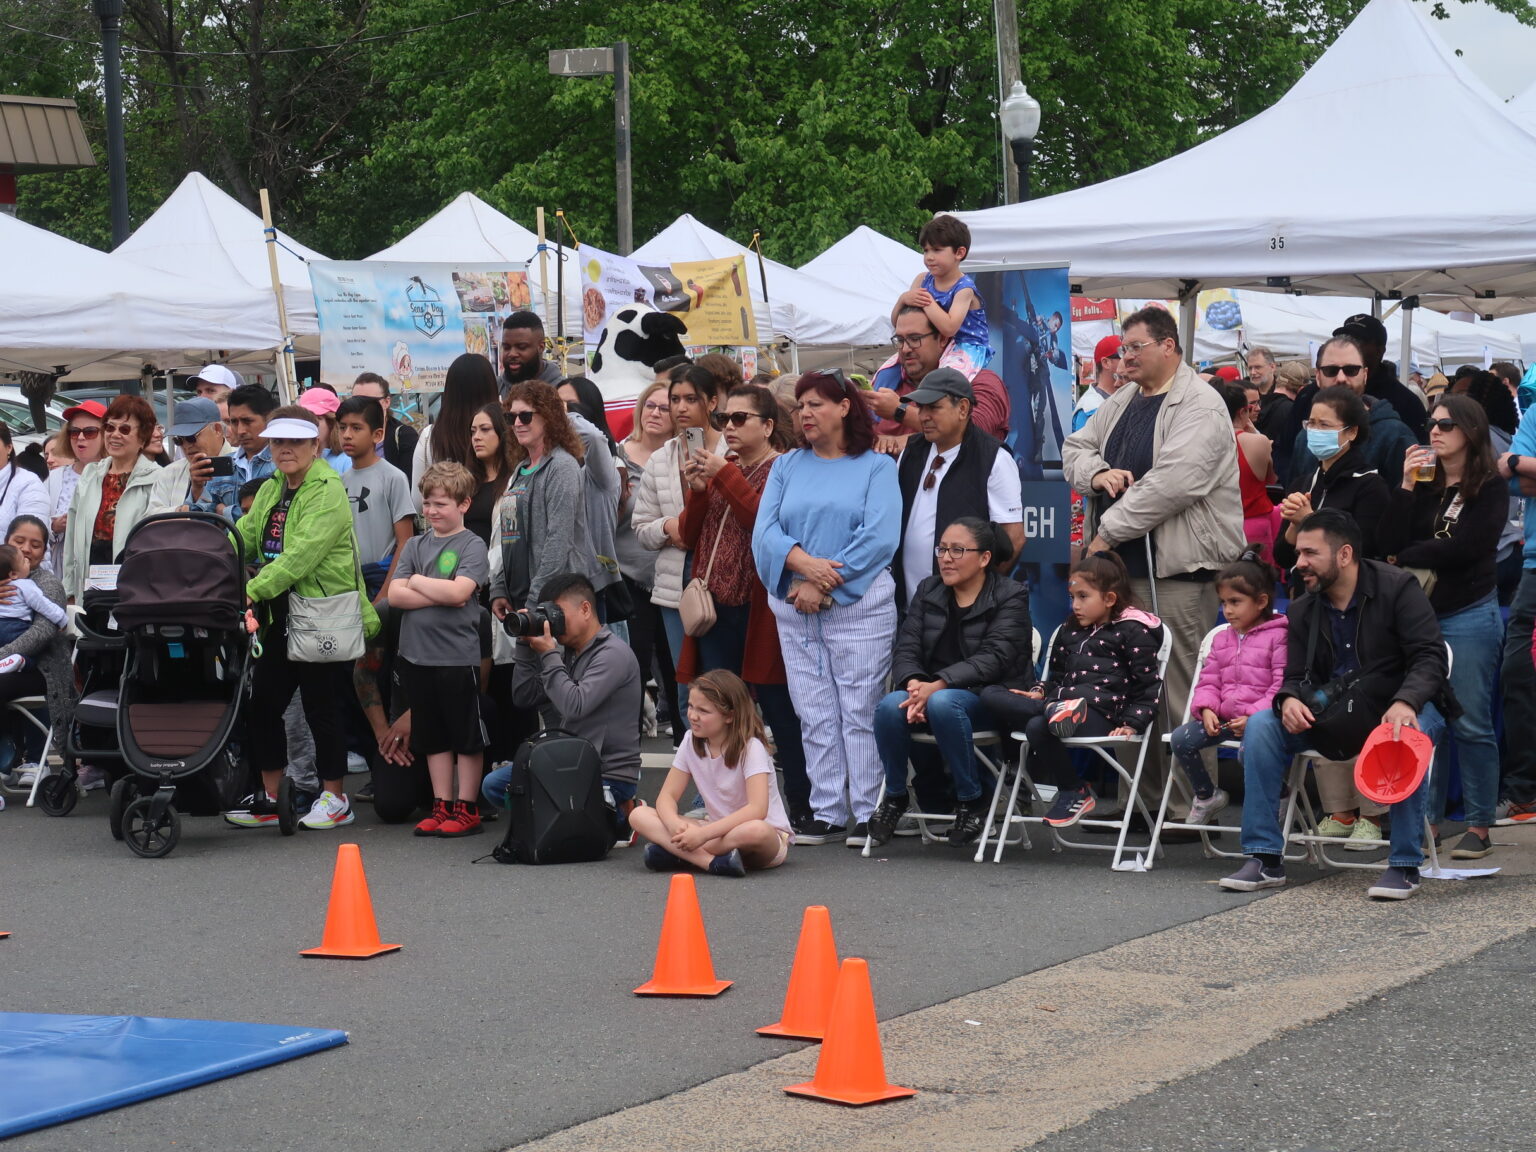 The Taste of Annandale brings the community together for food and fun